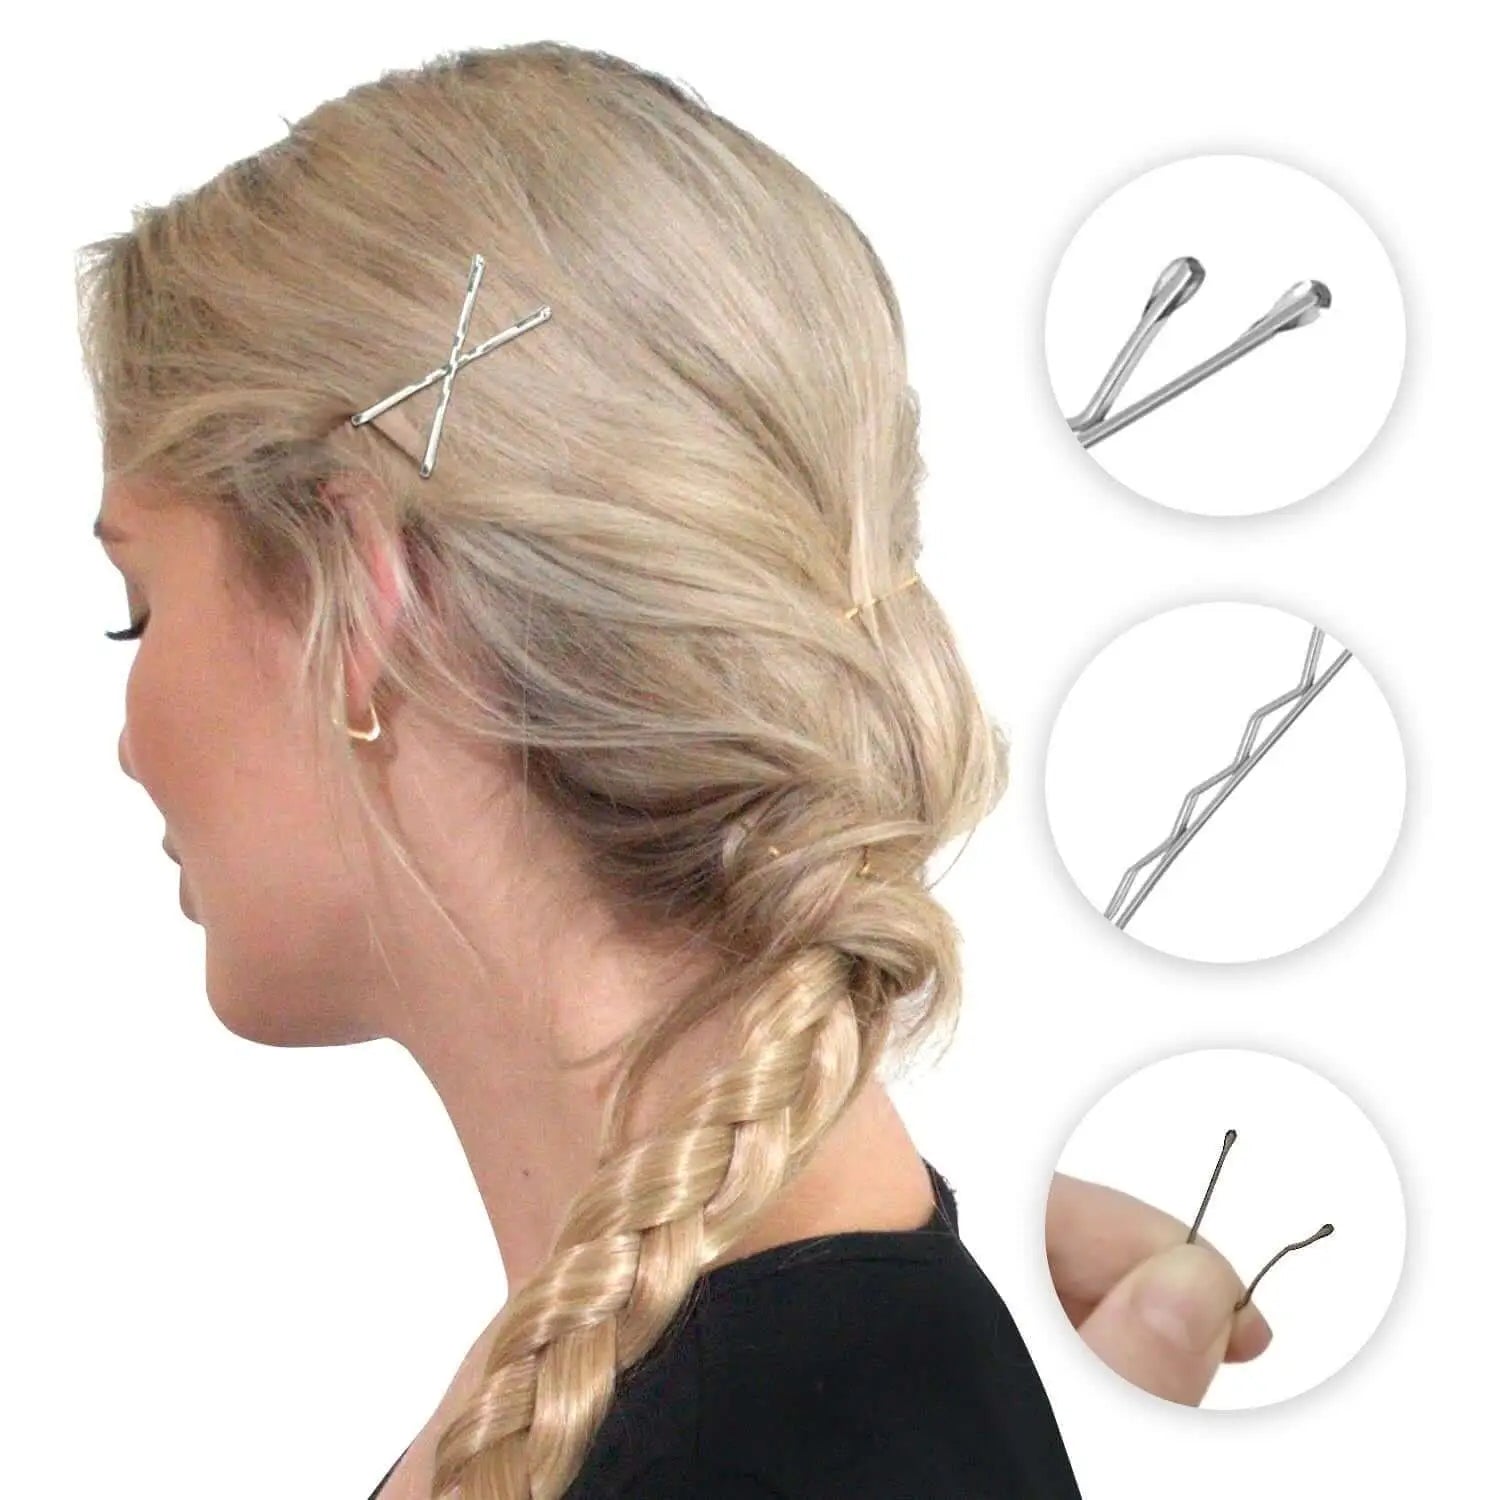 Woman with long hair cutting with scissors, featuring 120pc Wavy Kirby Metal Bobby Hair Pins Clips.